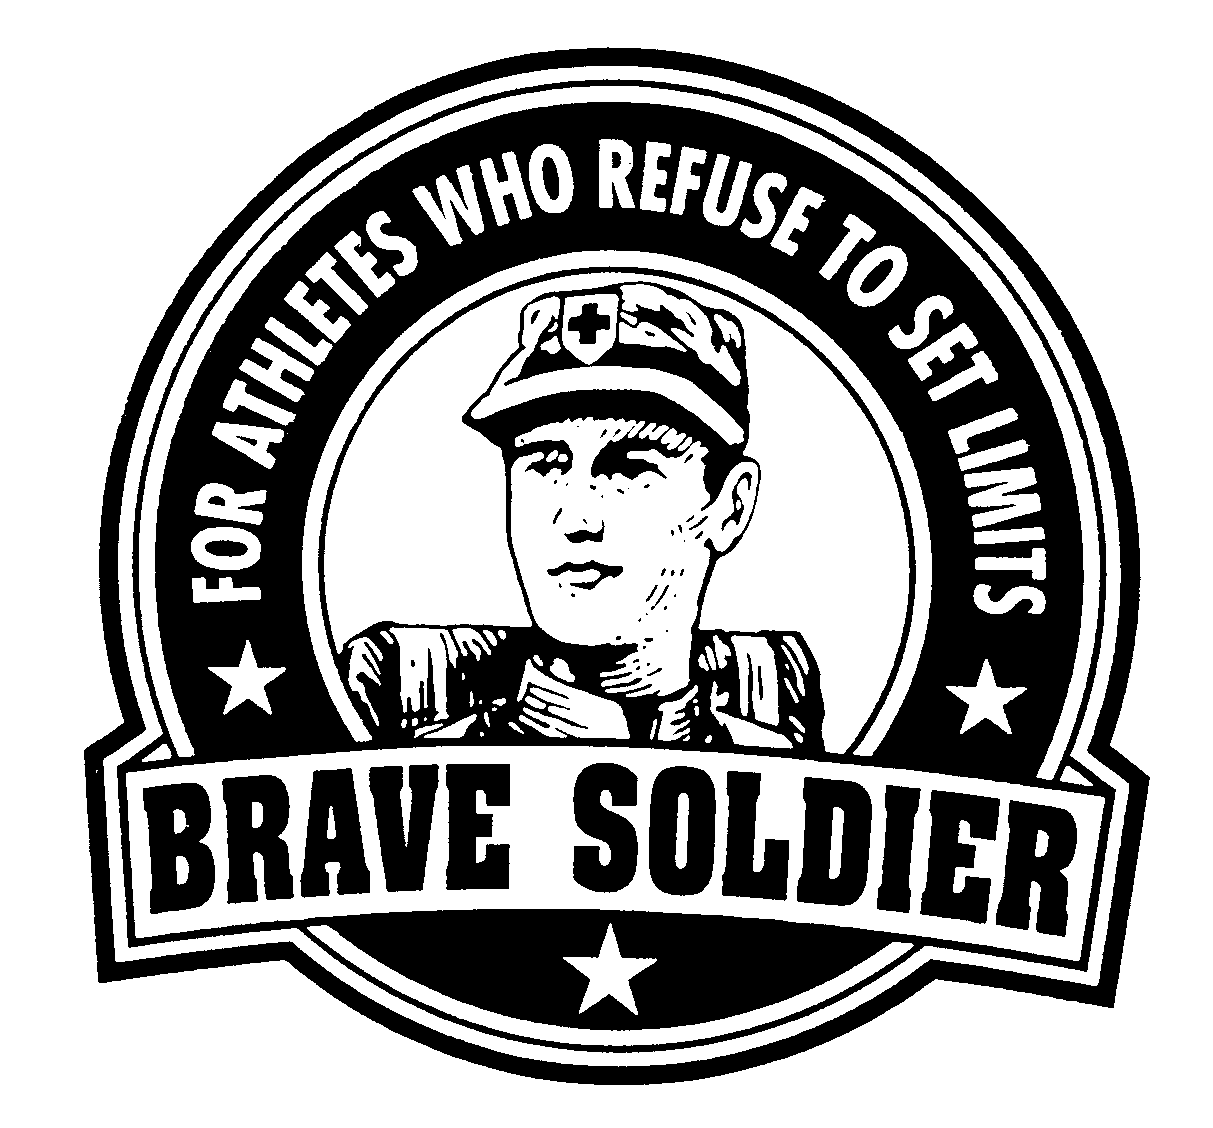  BRAVE SOLDIER FOR ATHLETES WHO REFUSE TO SET LIMITS